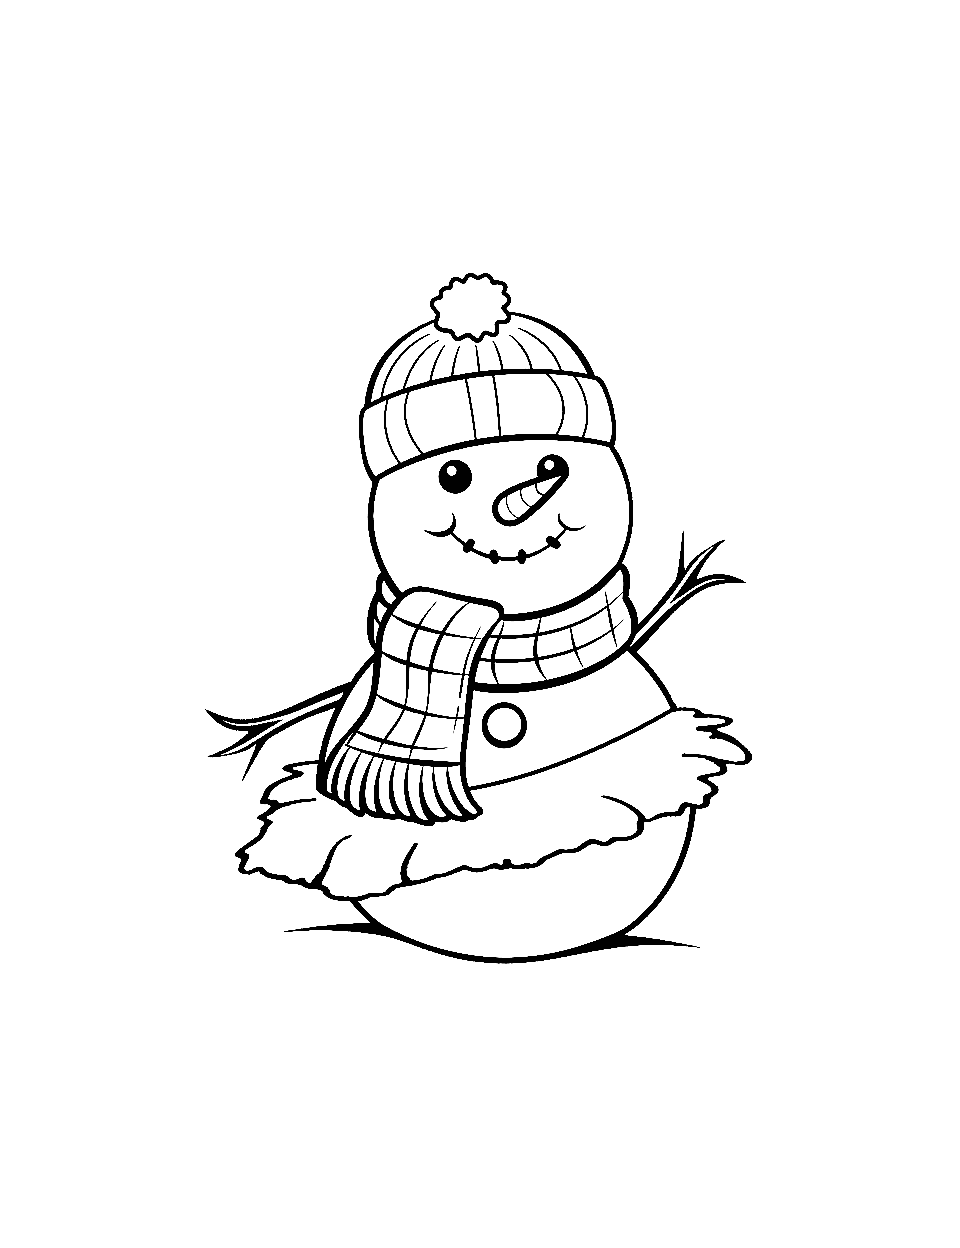 Snowman Ballerina Dancing Coloring Page - A graceful snowman in a tutu, performing a ballet dance.